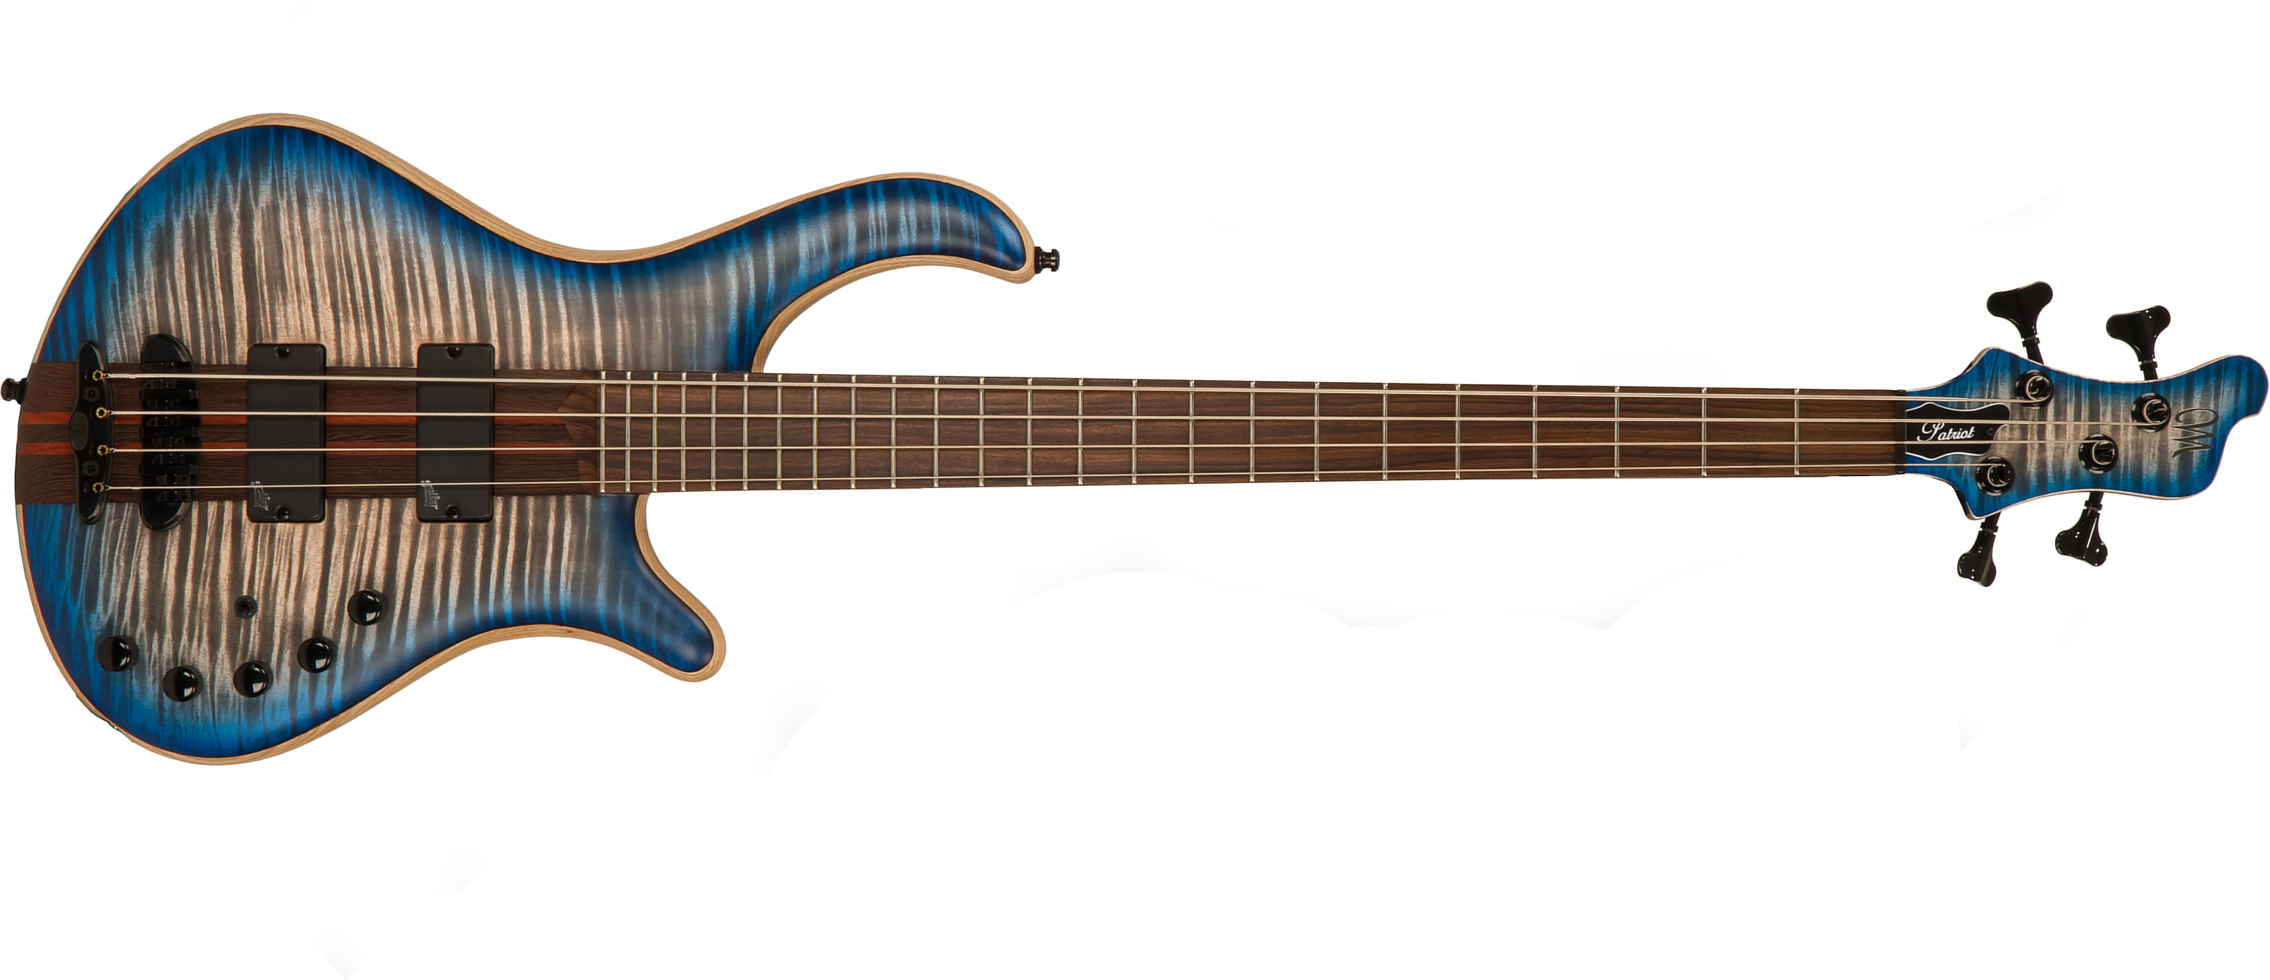 Mayones Guitars Patriot 4-cordes Aguilar Rw - Jeans Blue Flamed Maple - Solidbody E-bass - Main picture